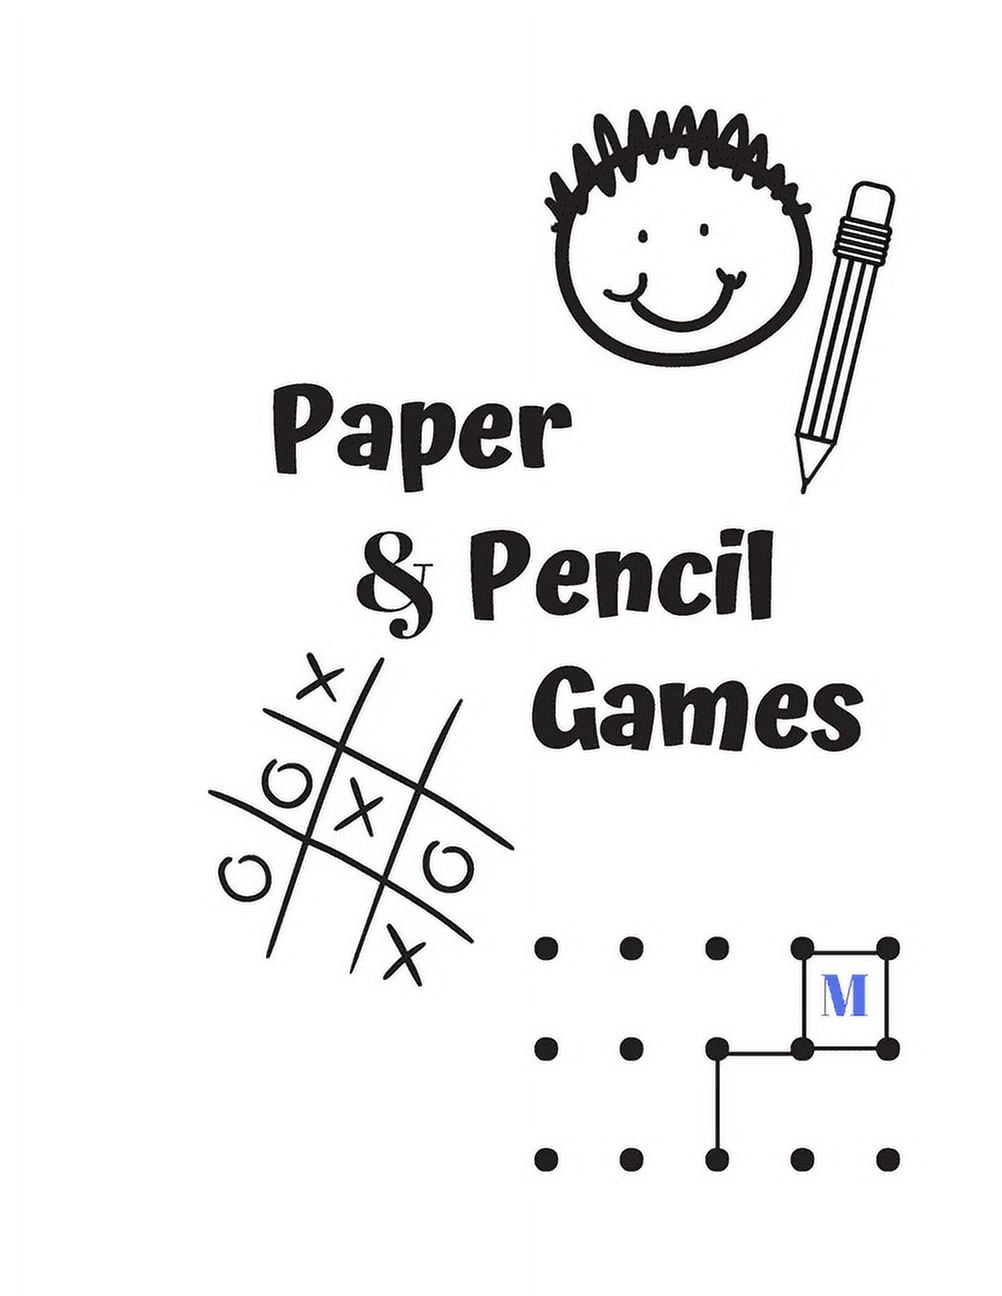 Games for Kids Age 6-10 : Never Bored --Paper & Pencil Games: 2 Player  Activity Book - Tic-Tac-Toe, Dots and Boxes - Noughts And Crosses (X and O)  